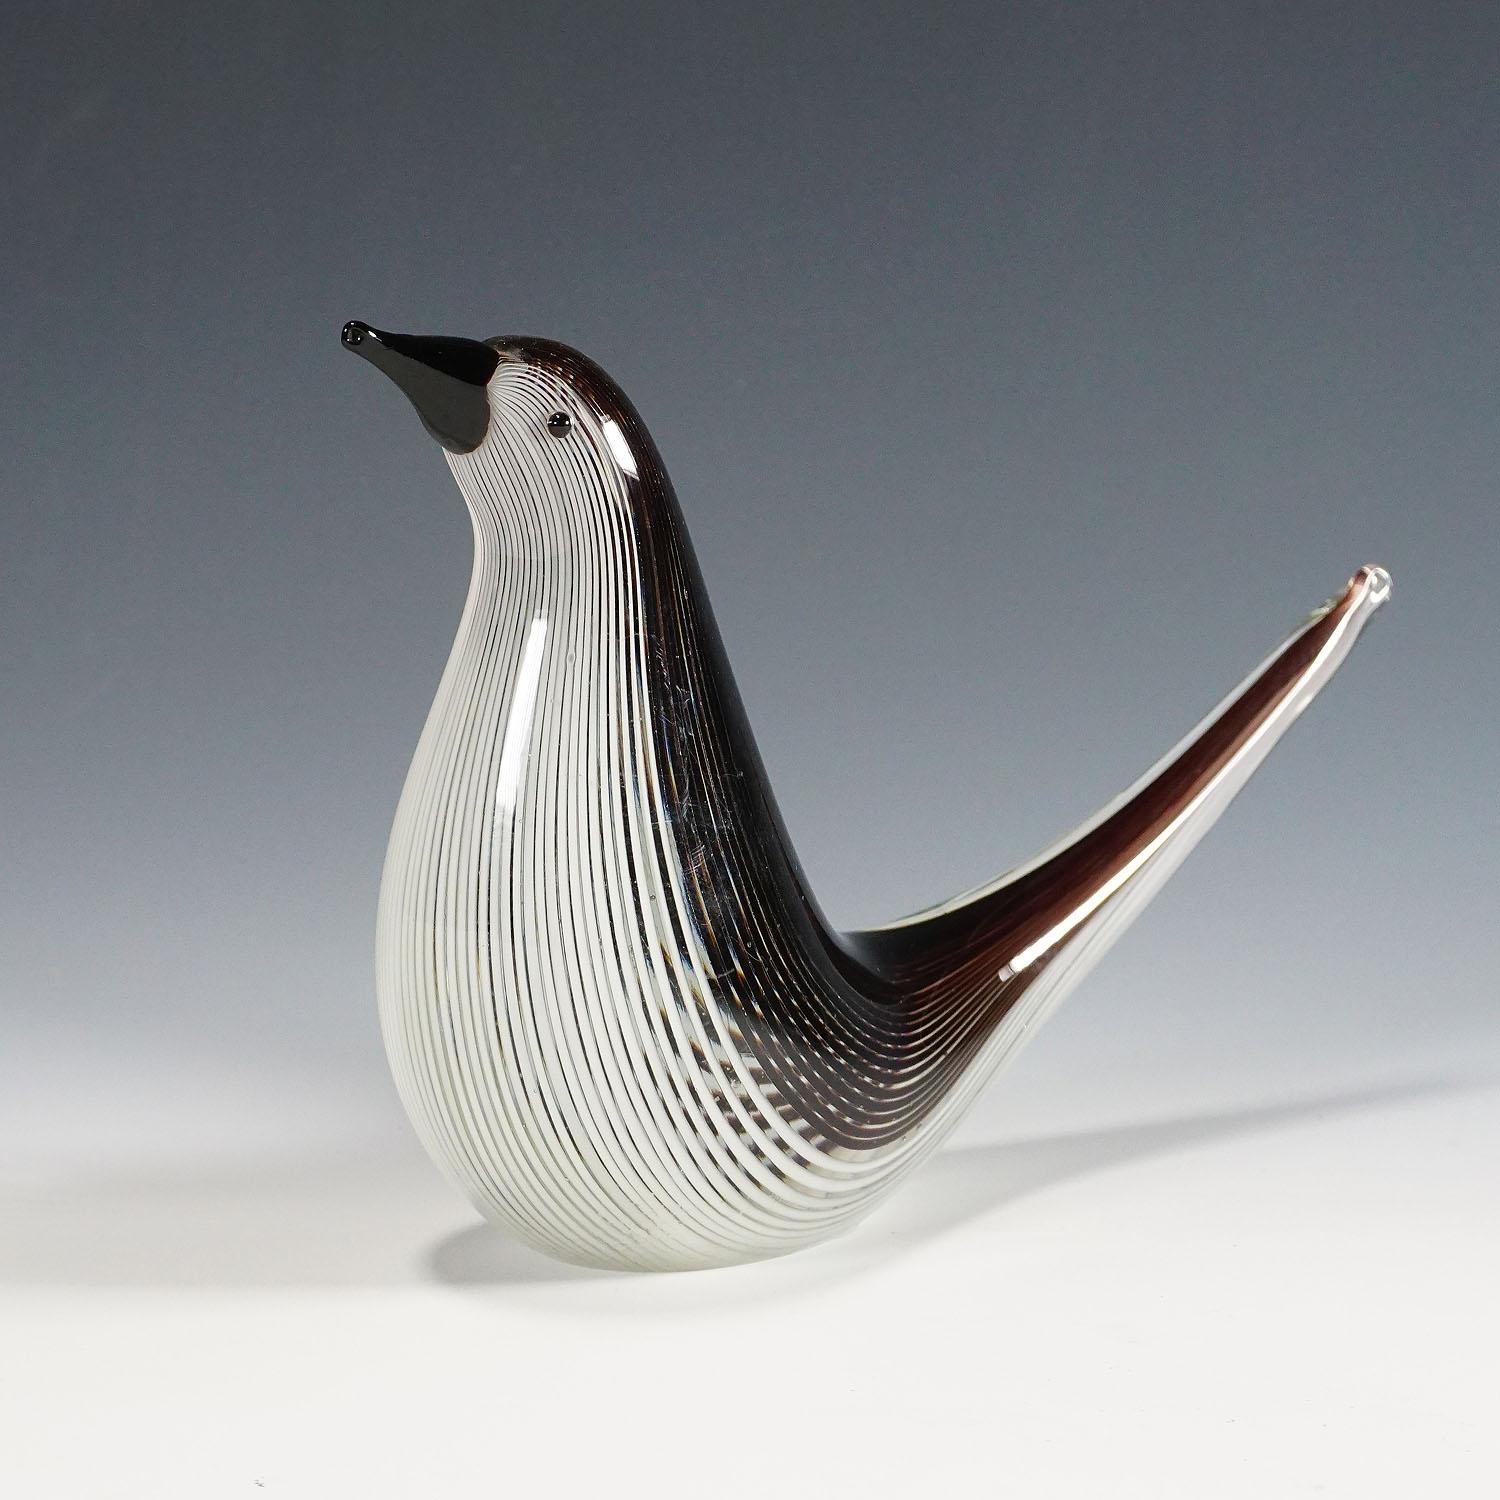 A nice waterbird designed by dino martens and manufactured by Aureliano Toso Italy Murano in the 1950ties. Executed in white and black filigree 